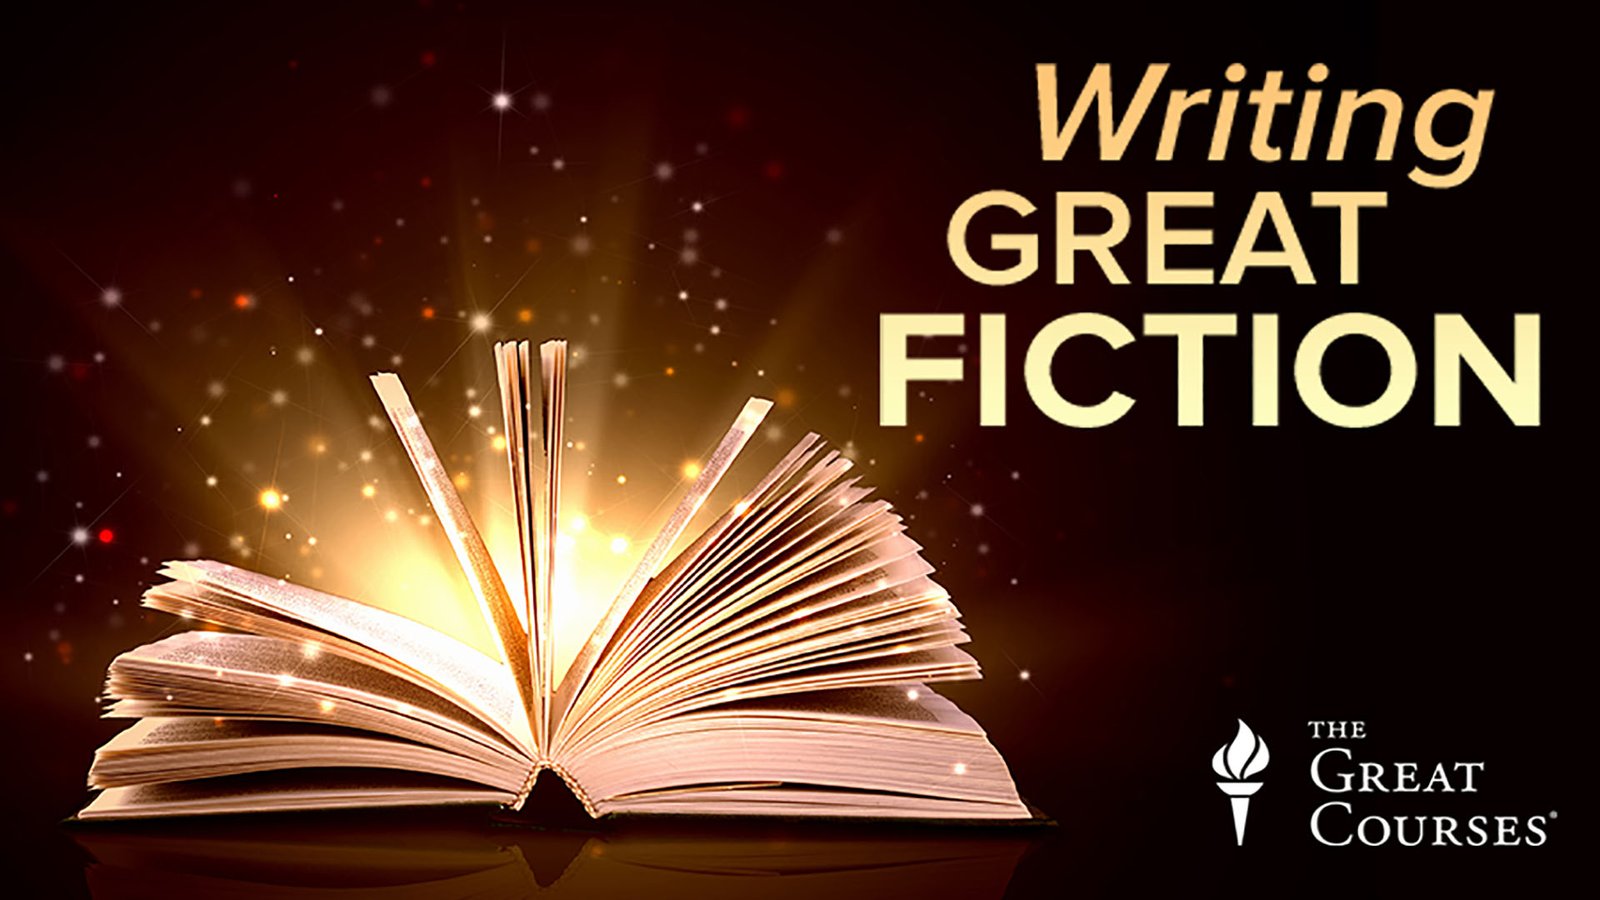 Writing Great Fiction - Storytelling Tips and Techniques